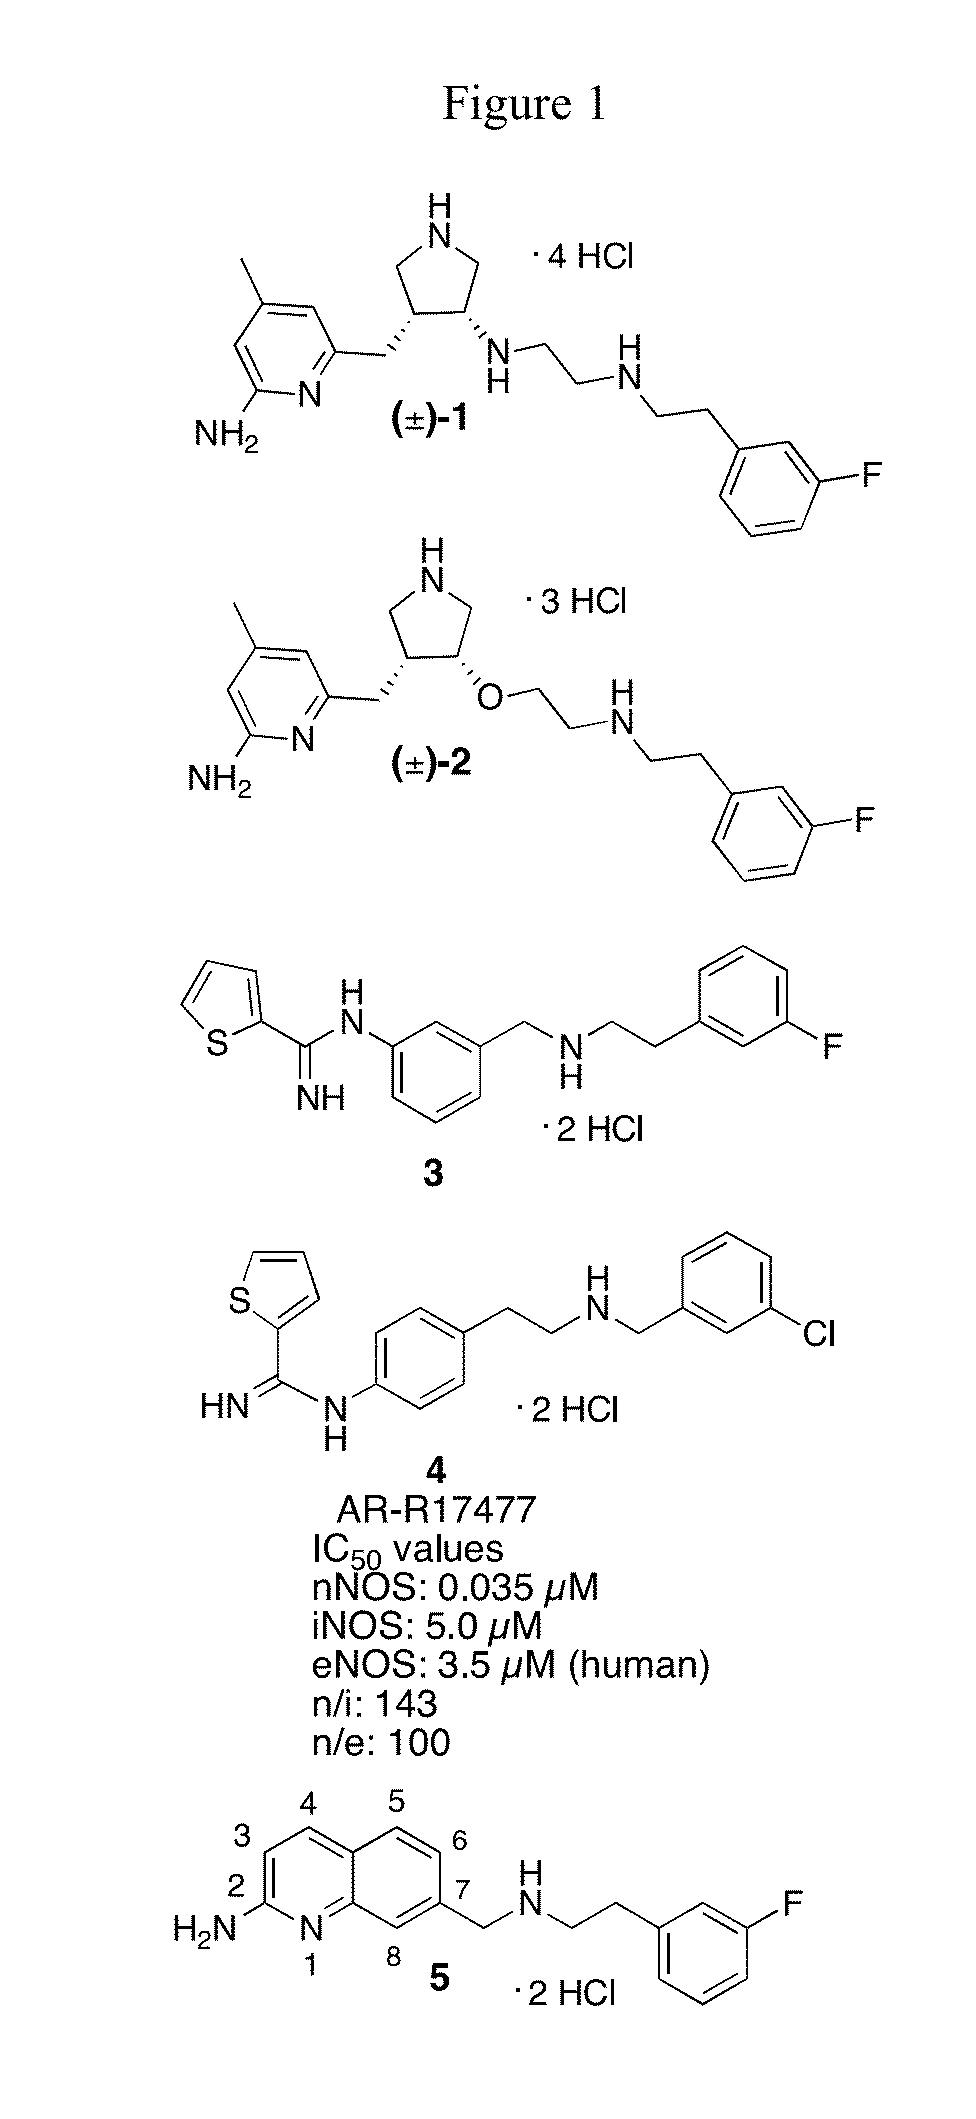 2-Aminoquinoline-Based Compounds for Potent and Selective Neuronal Nitric Oxide Synthase Inhibition